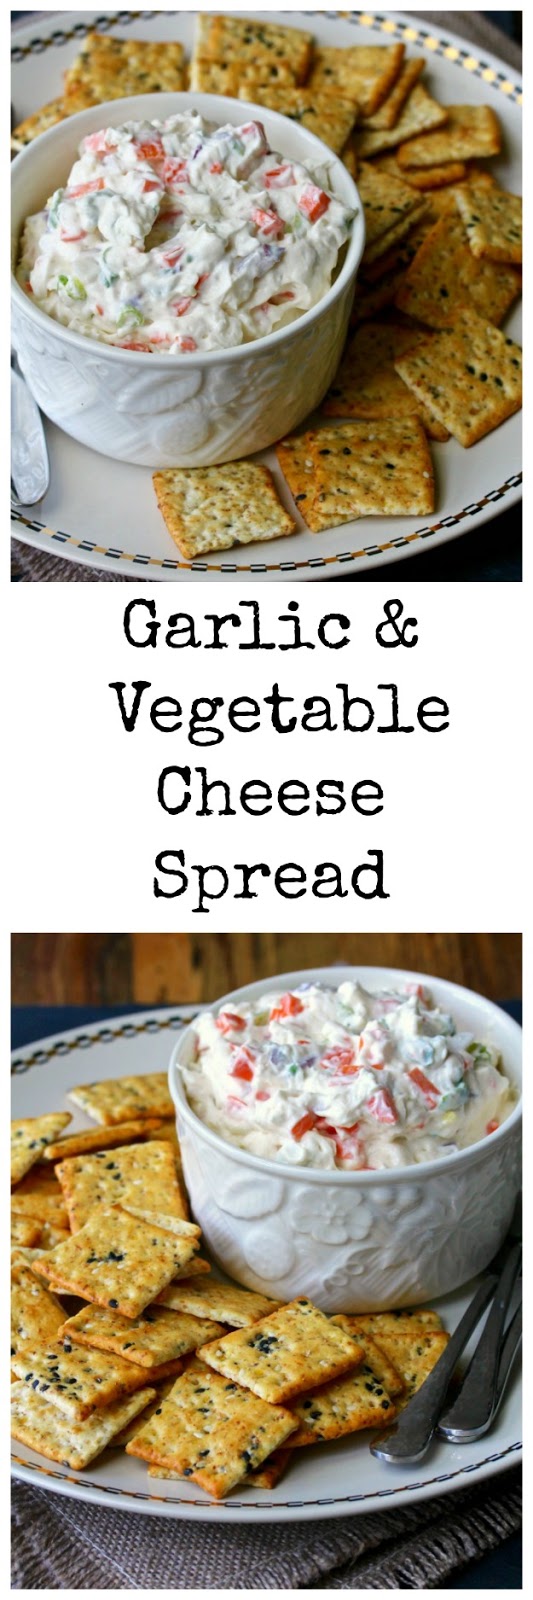 Garlic and Vegetable Cheese Spread